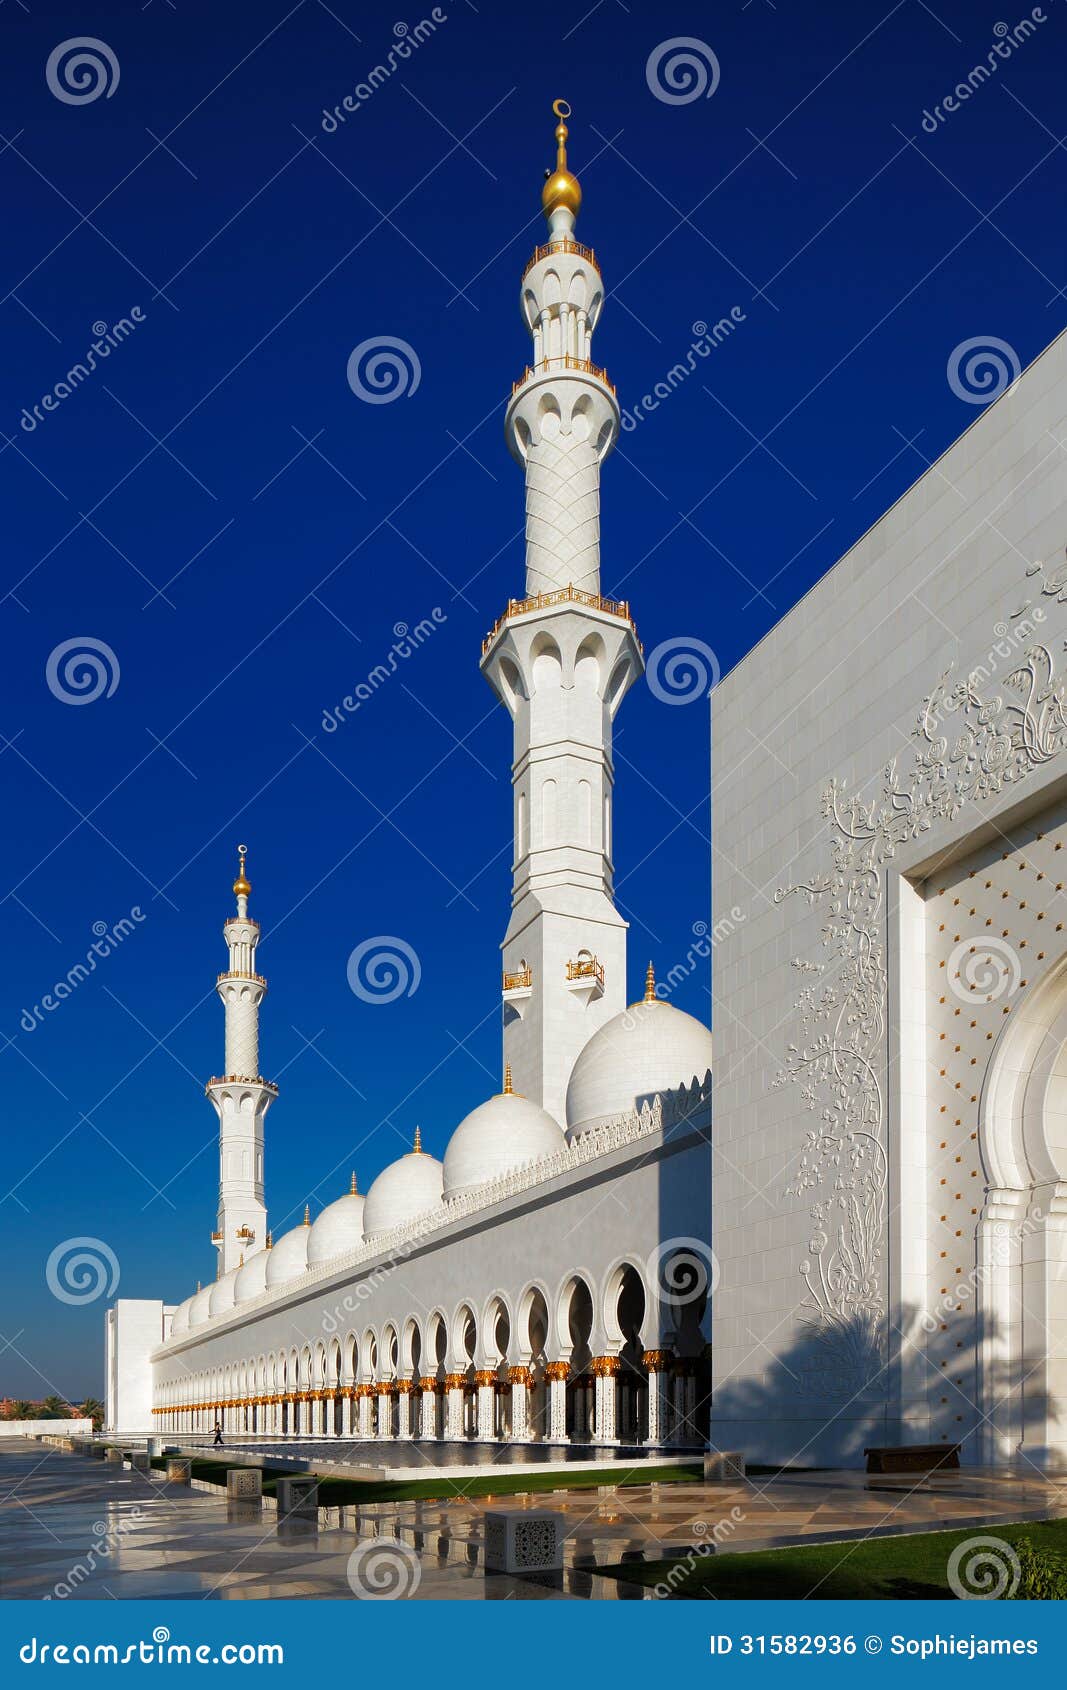 sheikh zayed grand mosque, abu dhabi is the largest in the uae